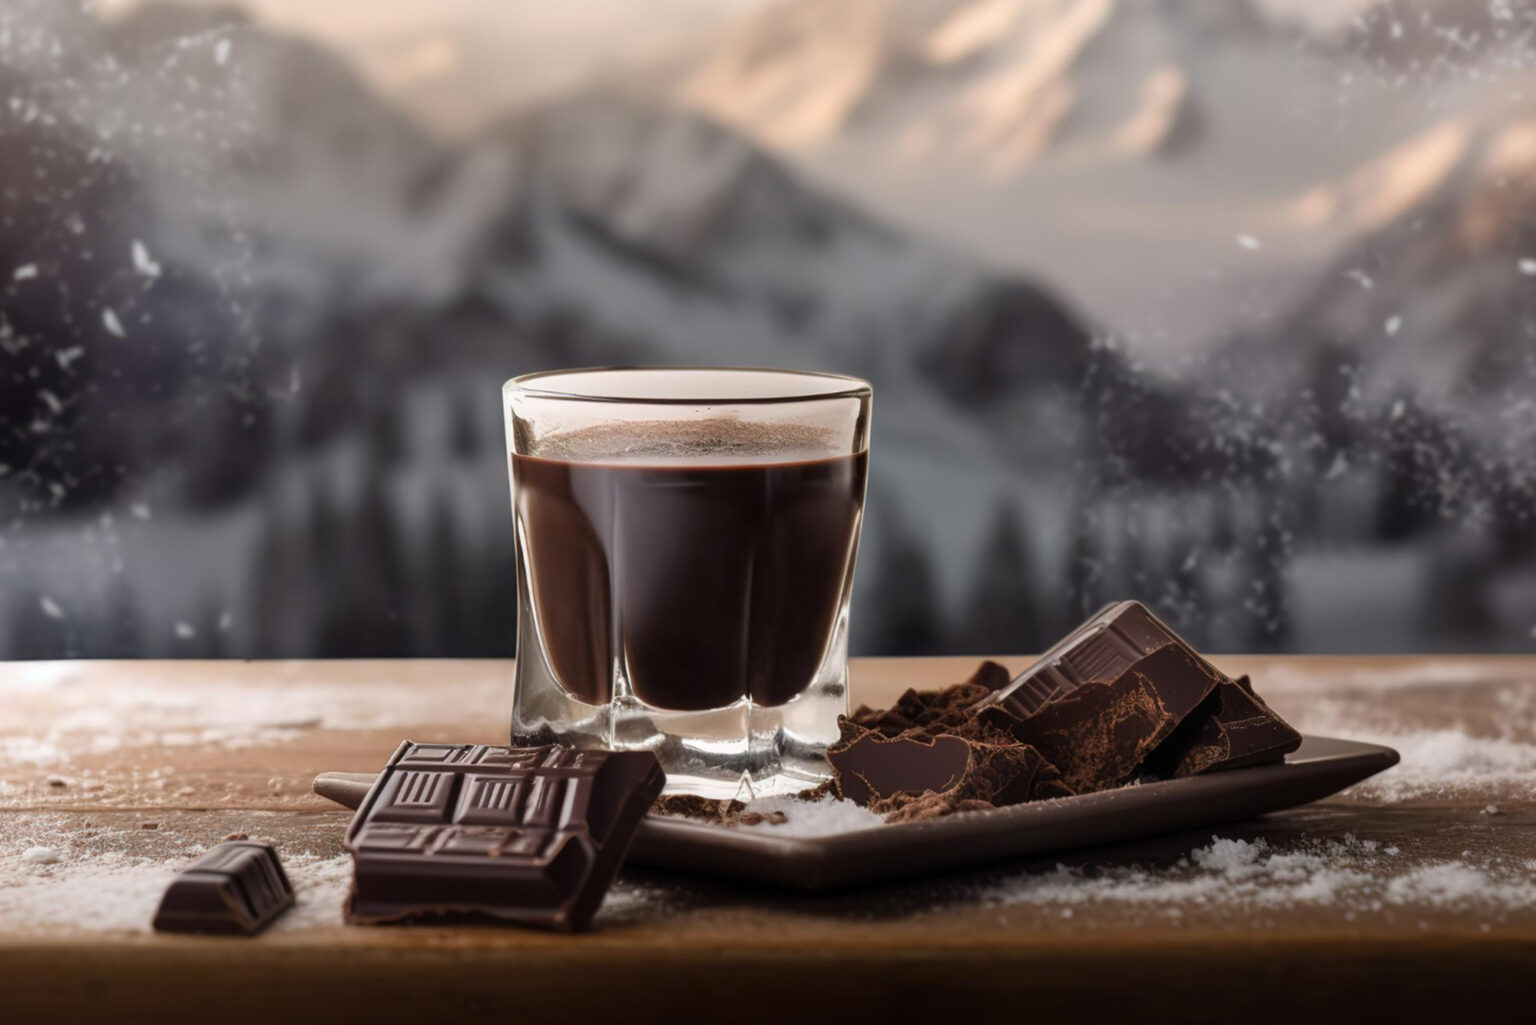 Chocolate & Coffees from Around the World